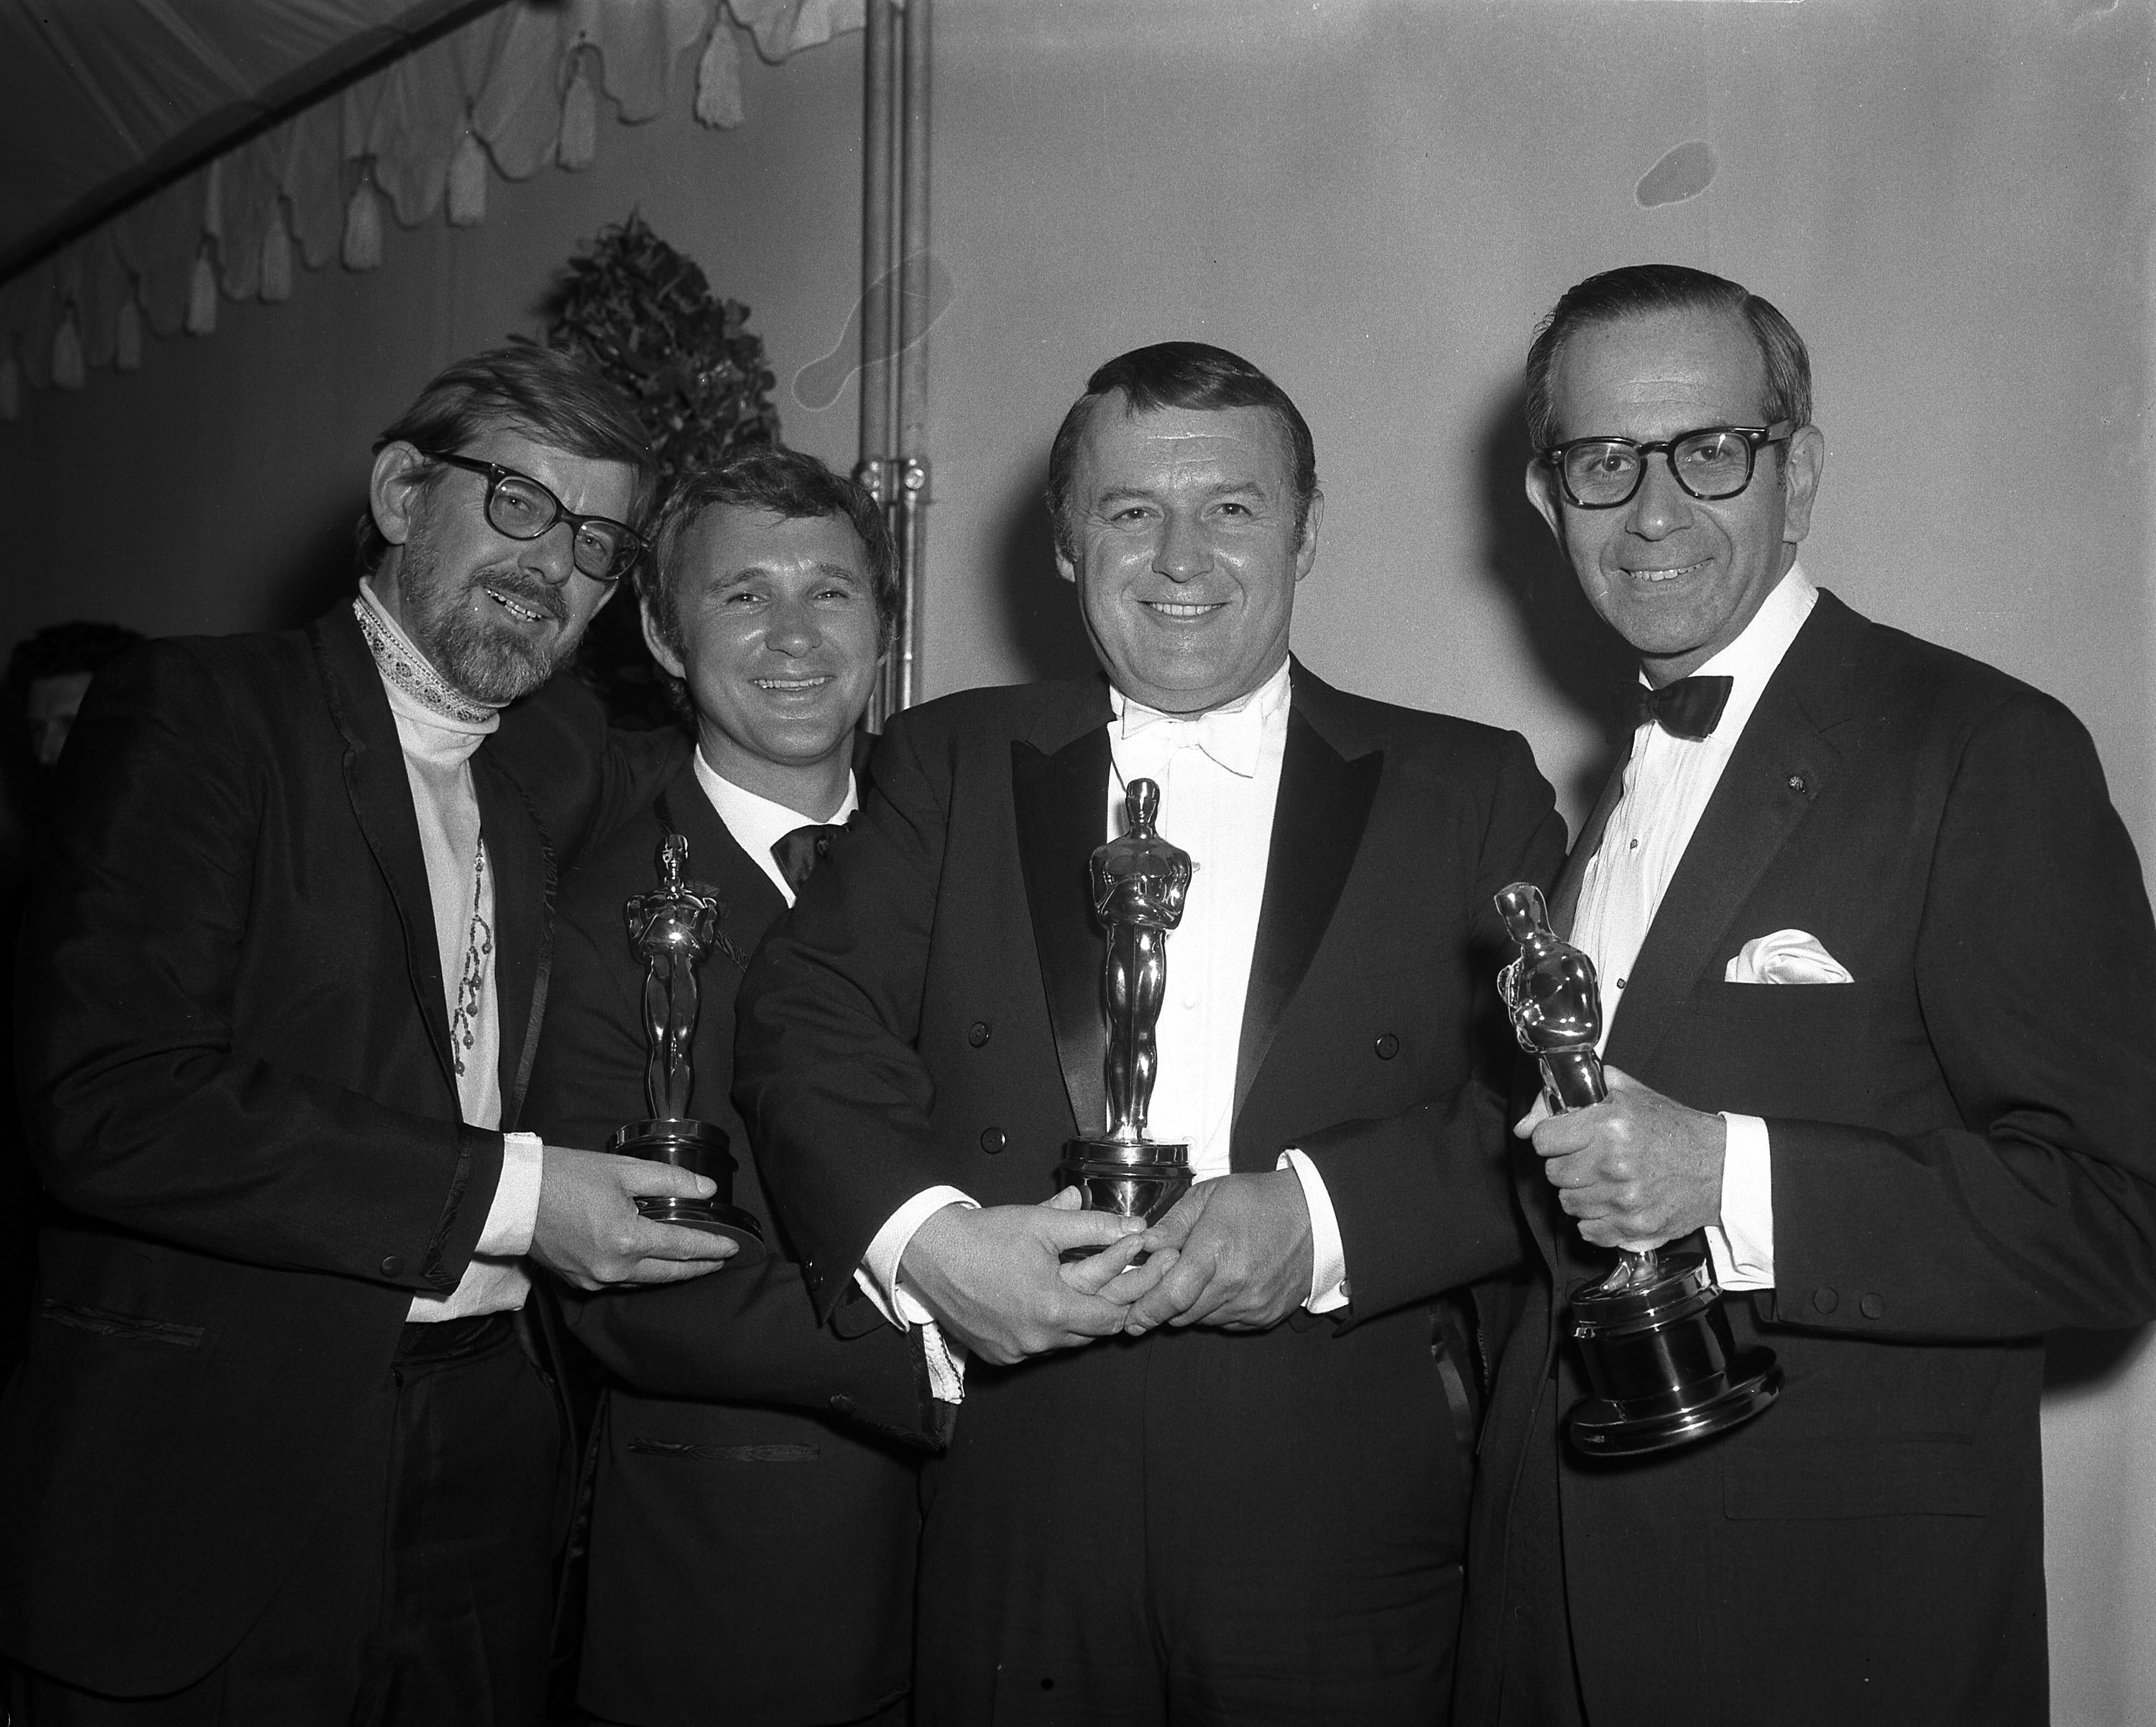 1968 | Oscars.org | Academy of Motion Picture Arts and Sciences